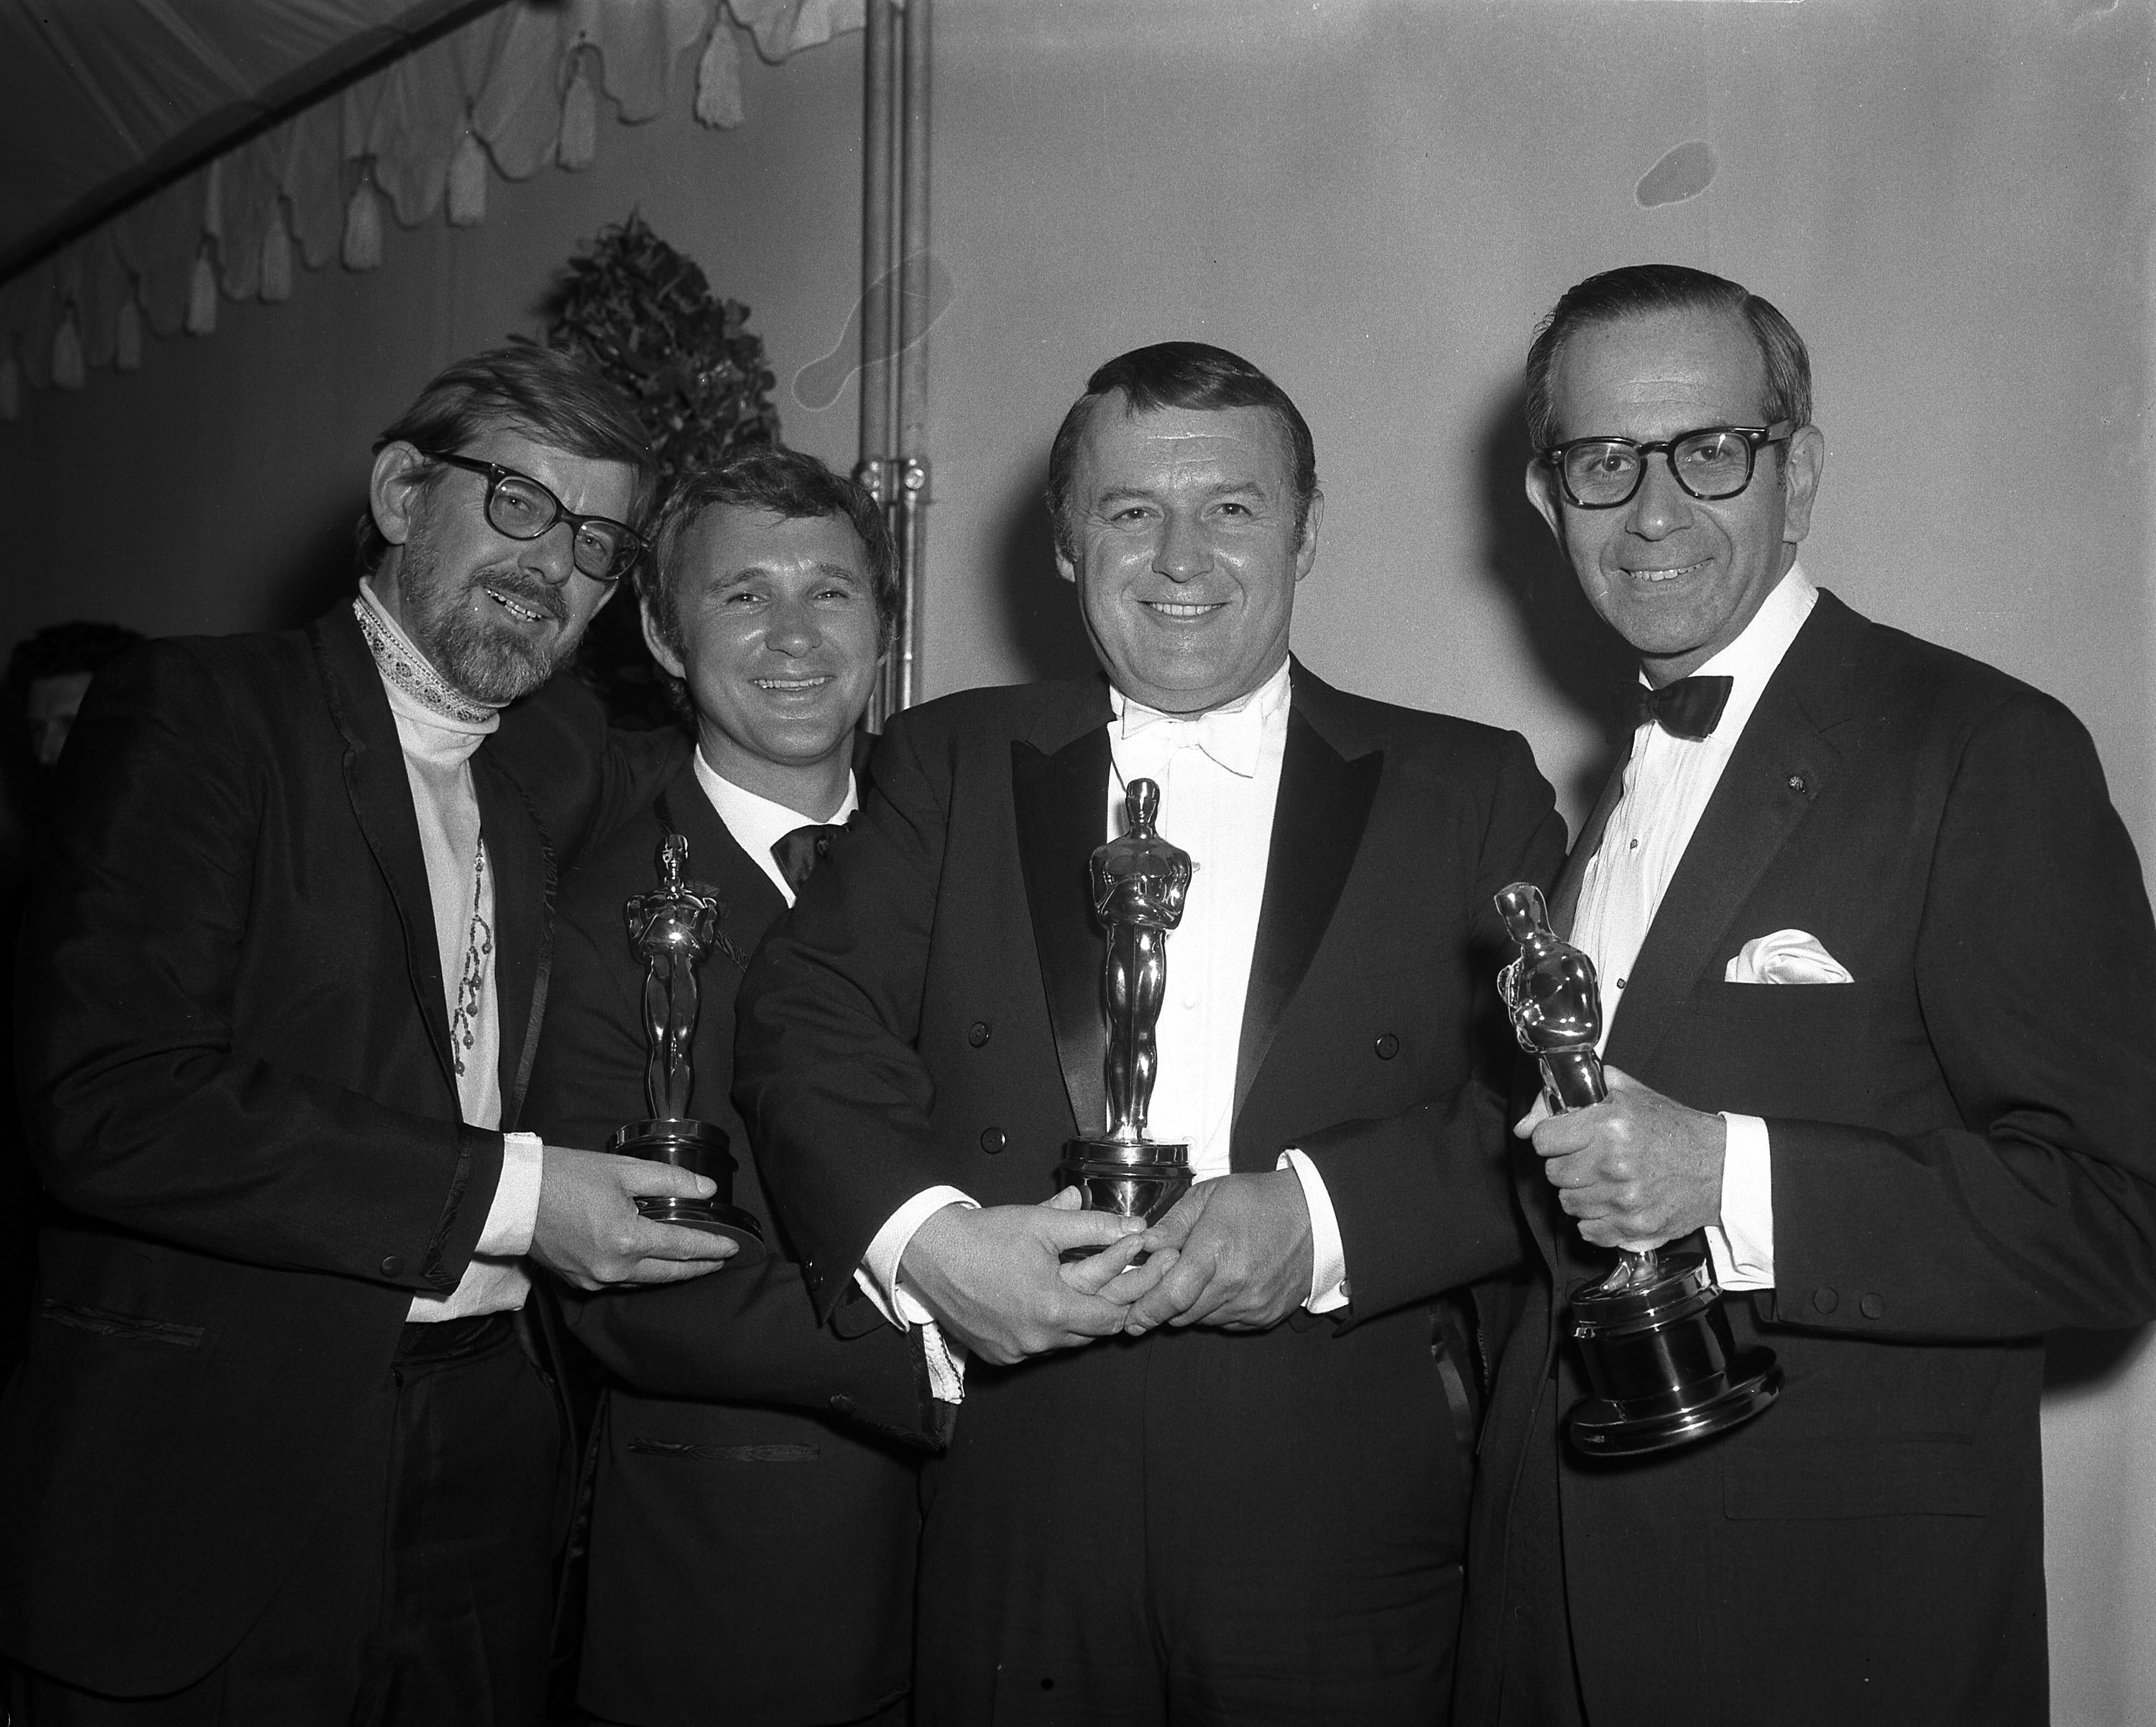 1968 | Oscars.org | Academy of Motion Picture Arts and Sciences